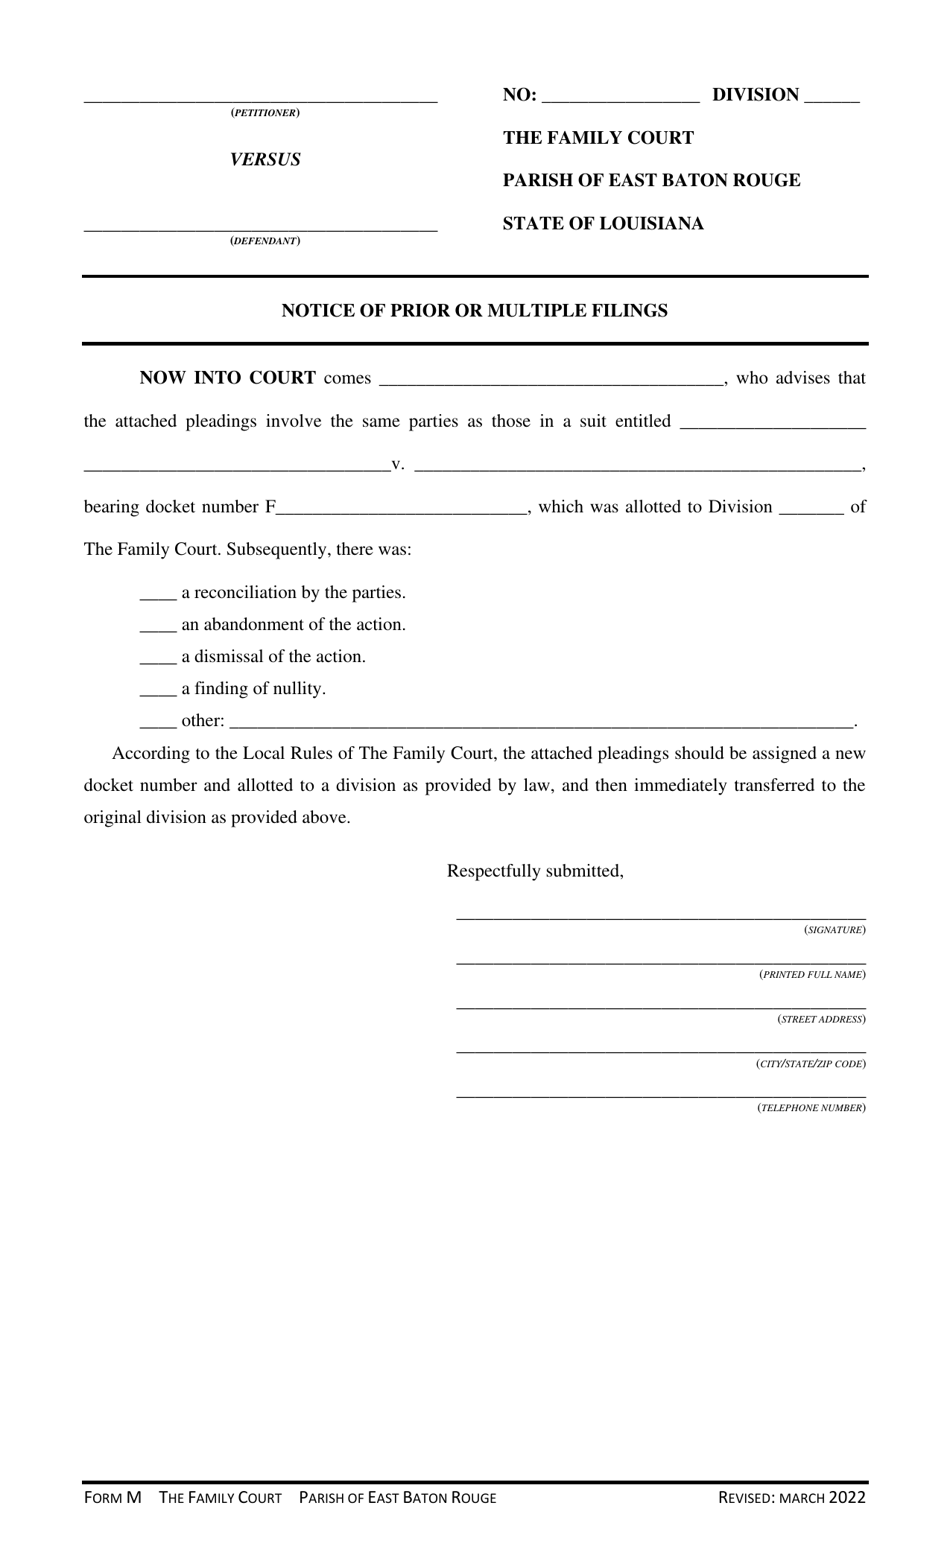 Form M Notice of Prior or Multiple Filings - Parish of East Baton Rouge, Louisiana, Page 1